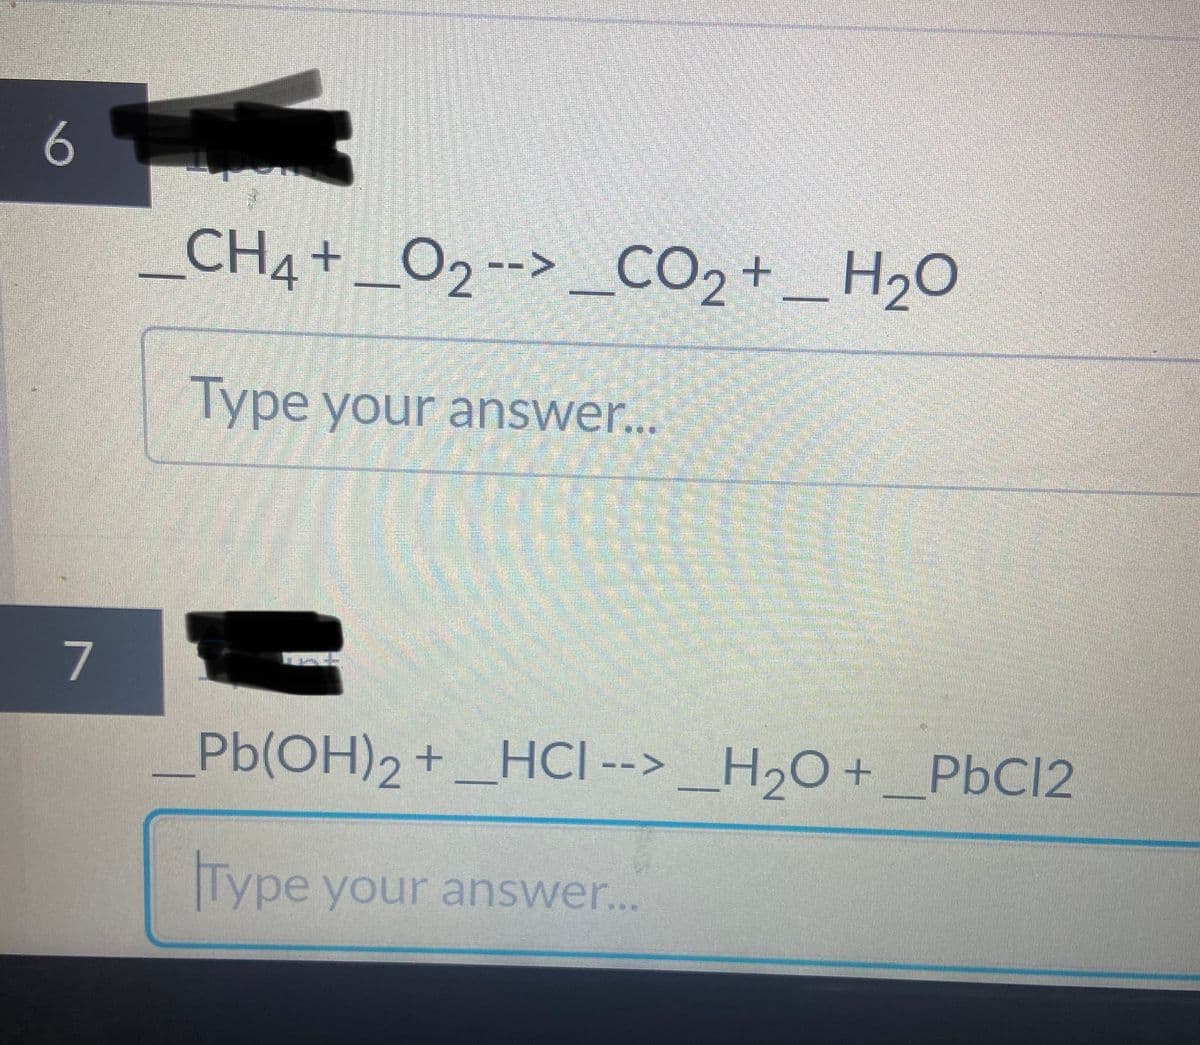 CH4+_O2--> _CO2 + _ H2O
Type your answer...
7
Pb(OH)2+_HCI --> _H2O +_P6C12
Type your answer..
